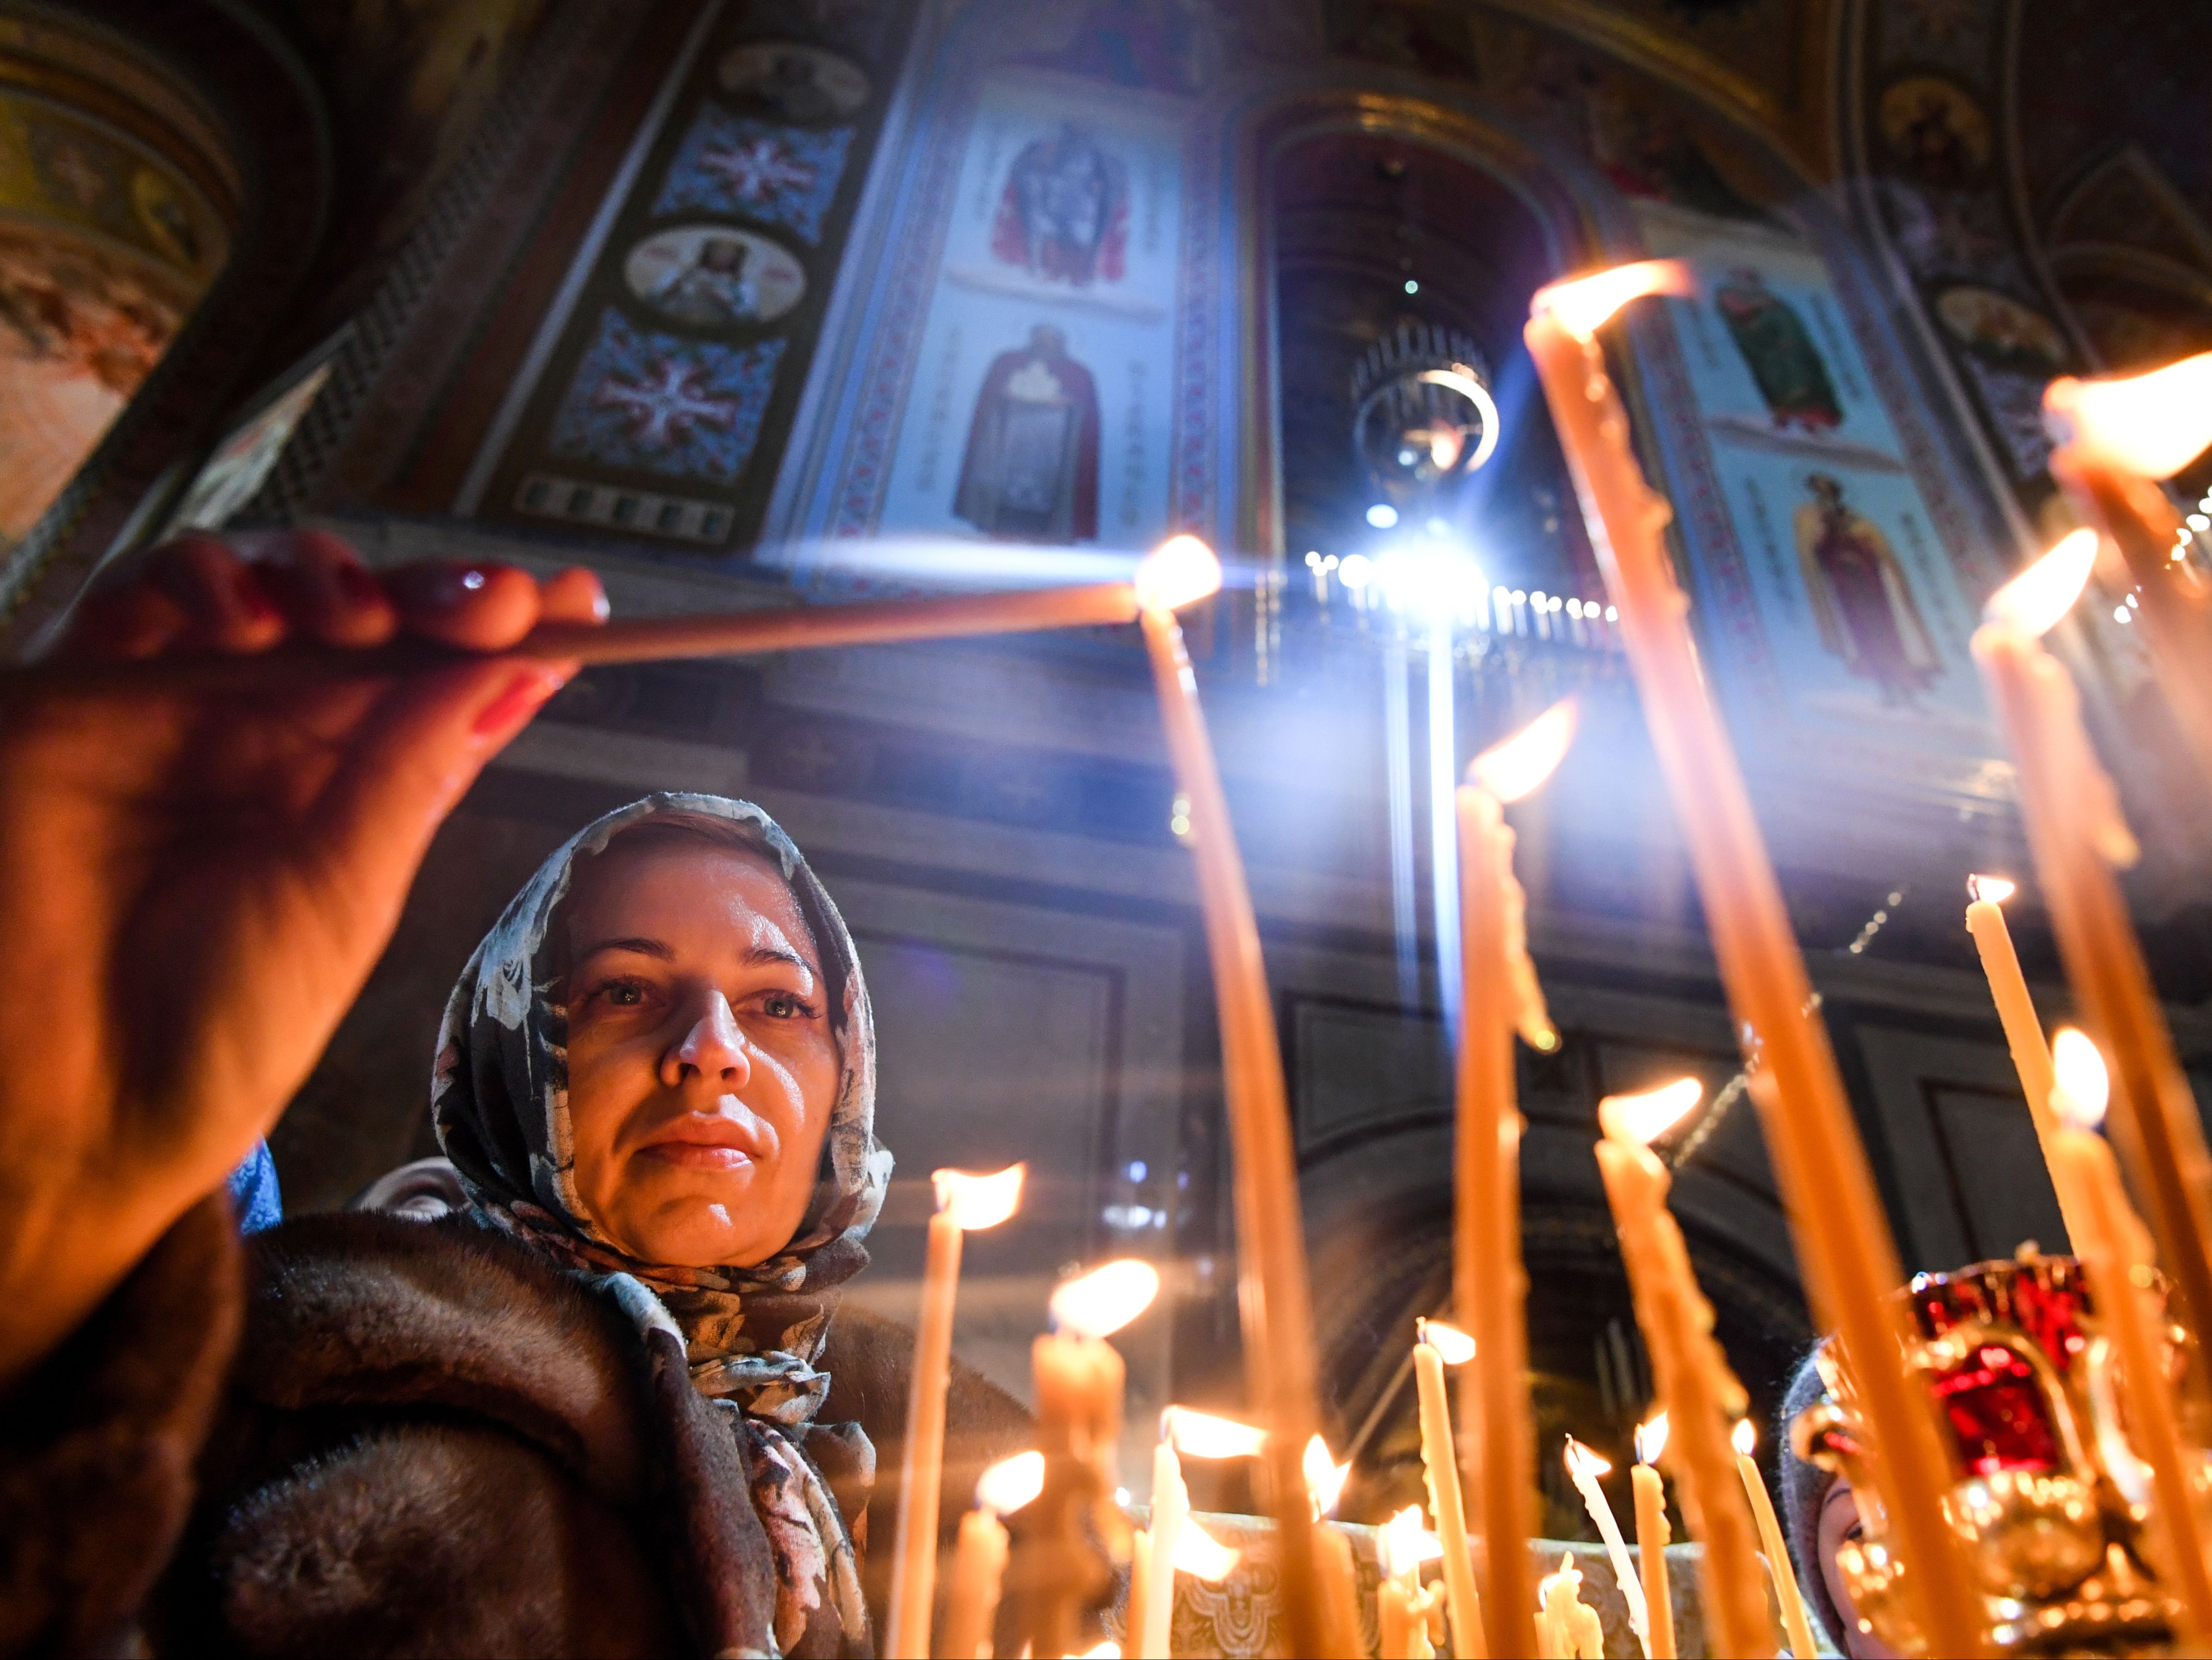 Russian Orthodox churchgoers have not been sufficiently protected, it was claimed